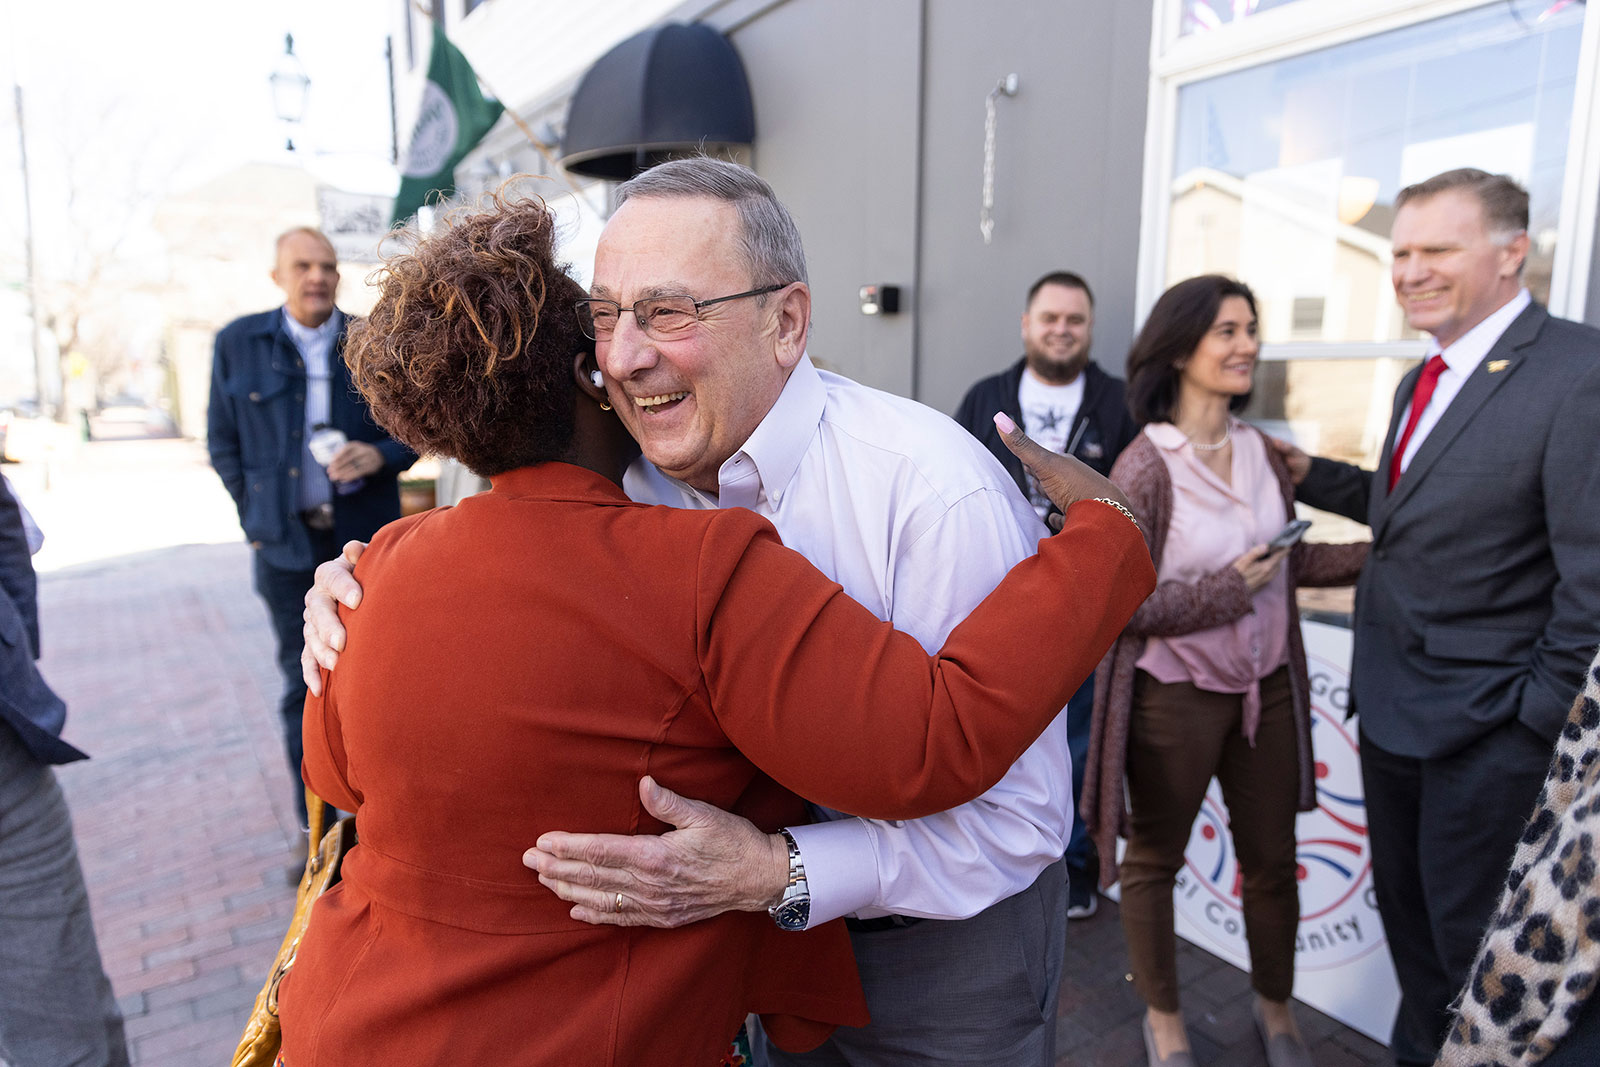 Former Gov. Paul LePage greets people after speaking at a grand opening held by the Maine Republican Party in Portland, Maine, on April 5. 